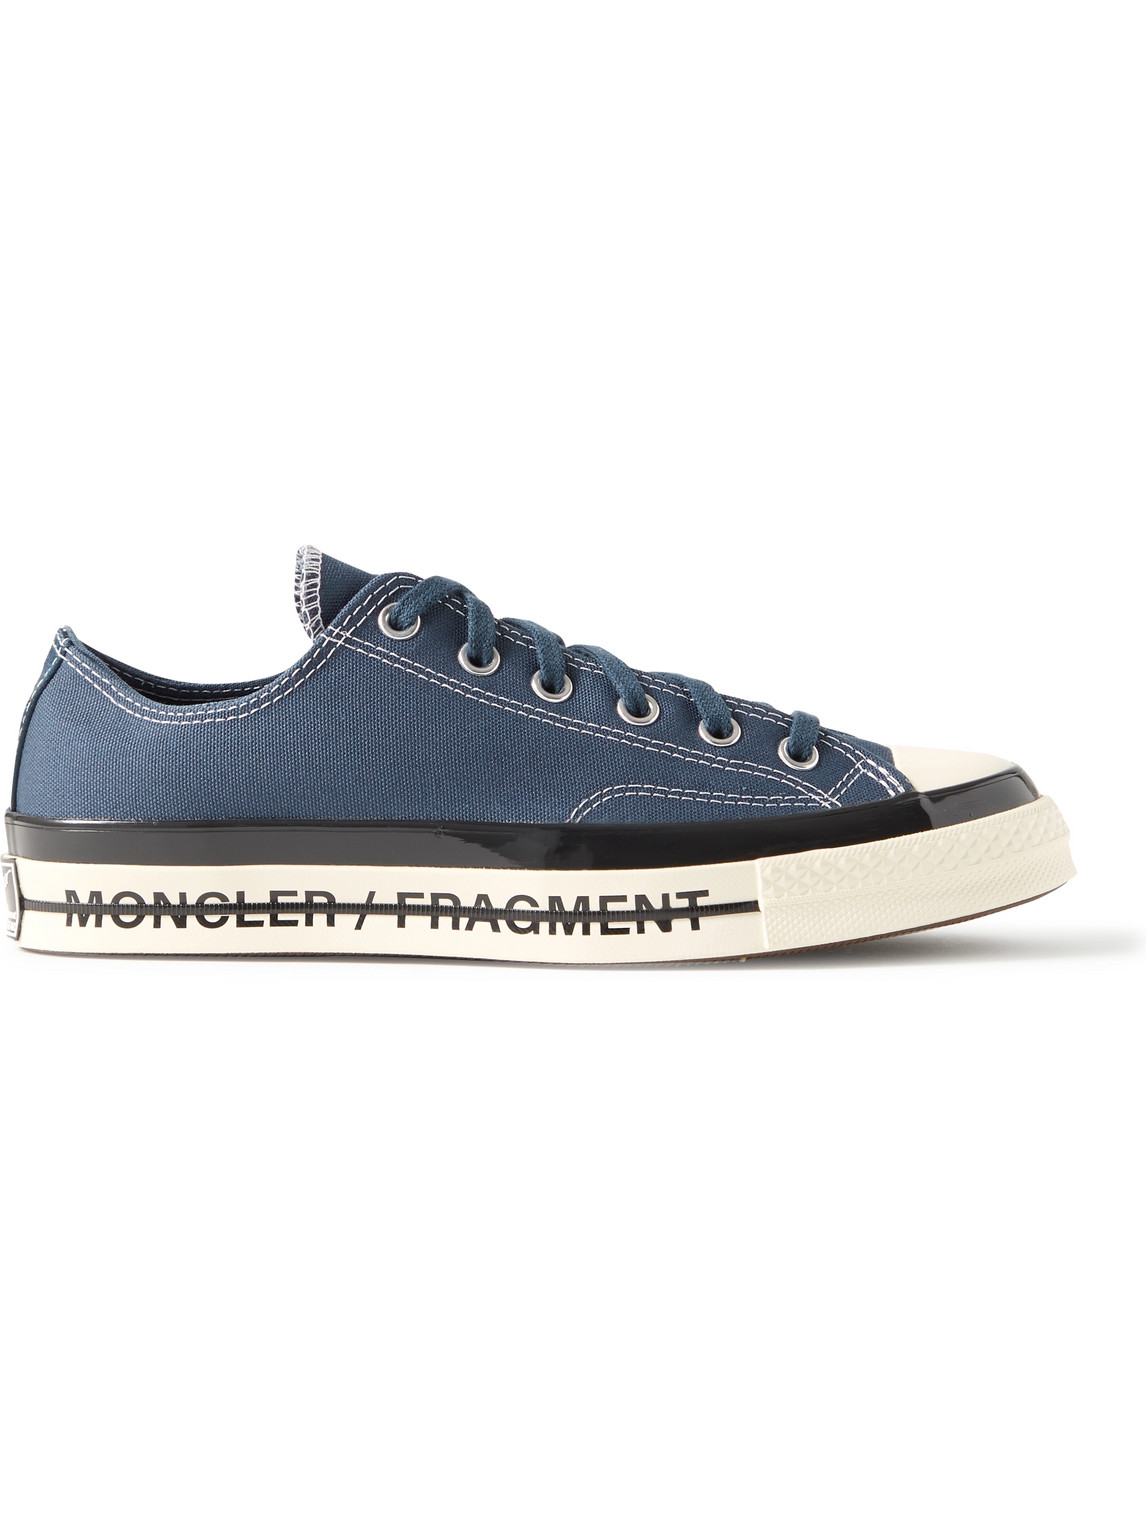 Moncler Converse 7  Fragment Fraylor Iii Canvas Sneakers In Blue